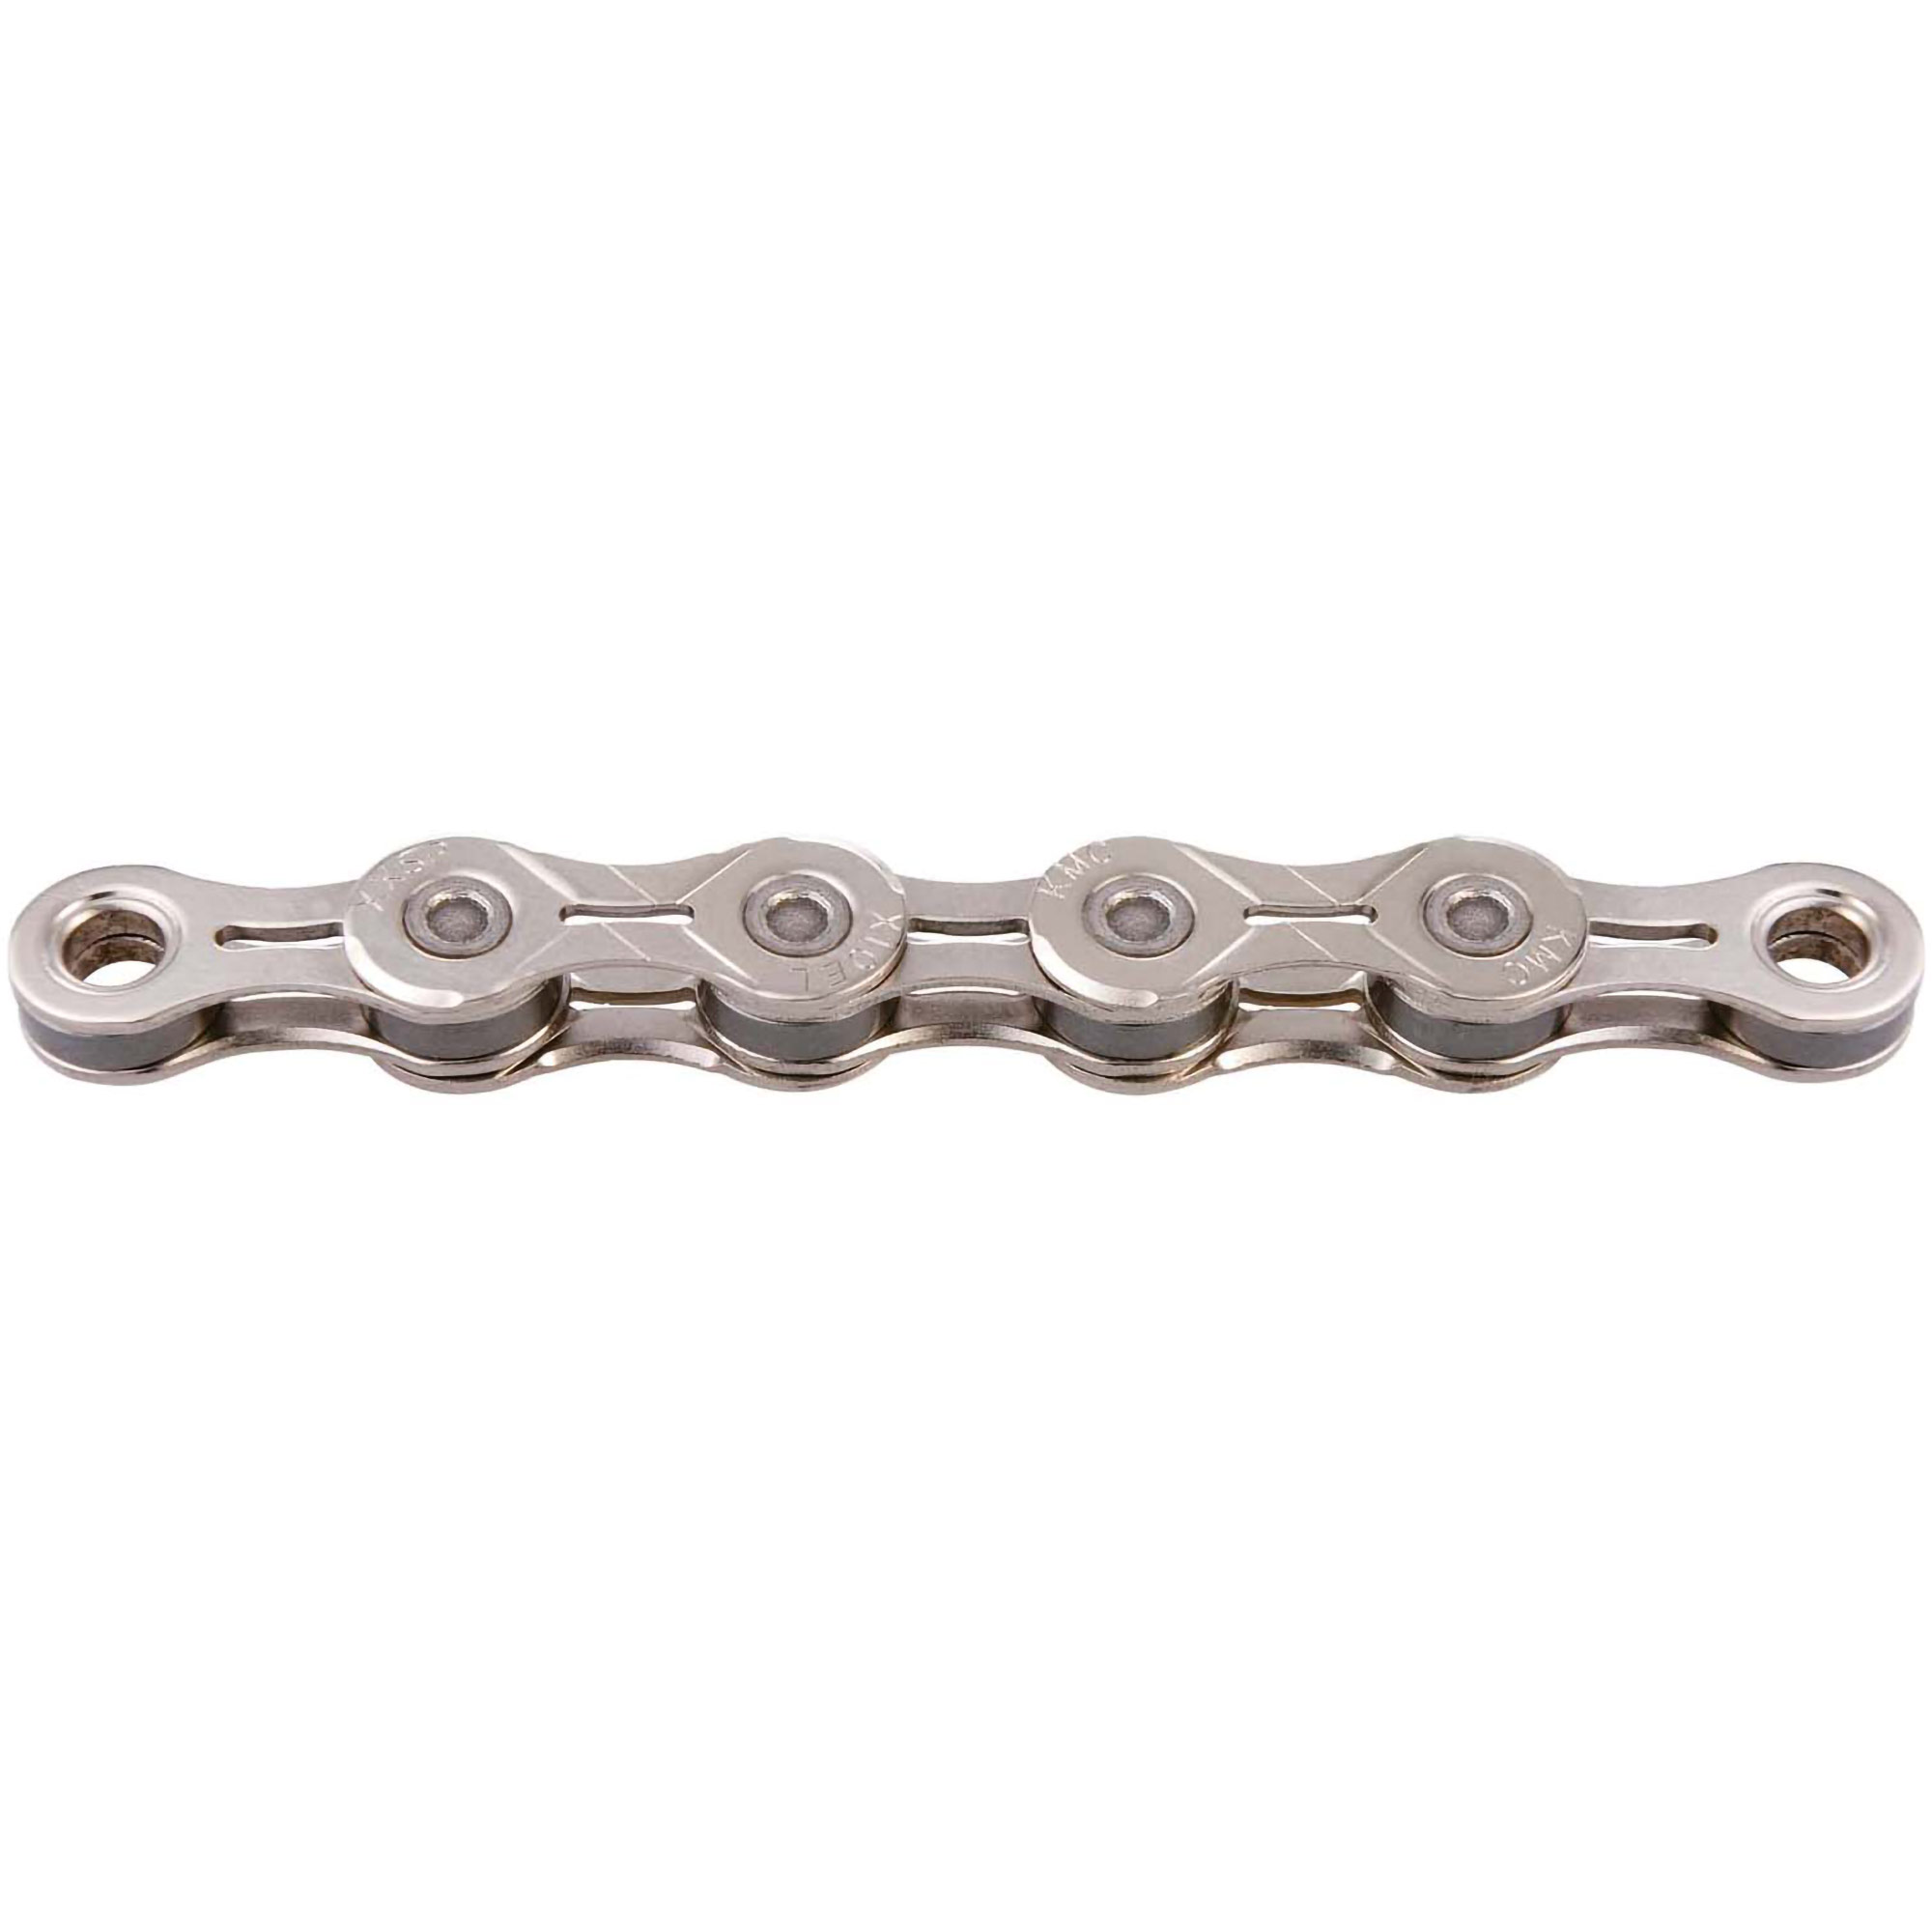 KMC X10-EL 114 Link 10 Speed Cycle Bike Chain For Campagnolo SRAM | eBay